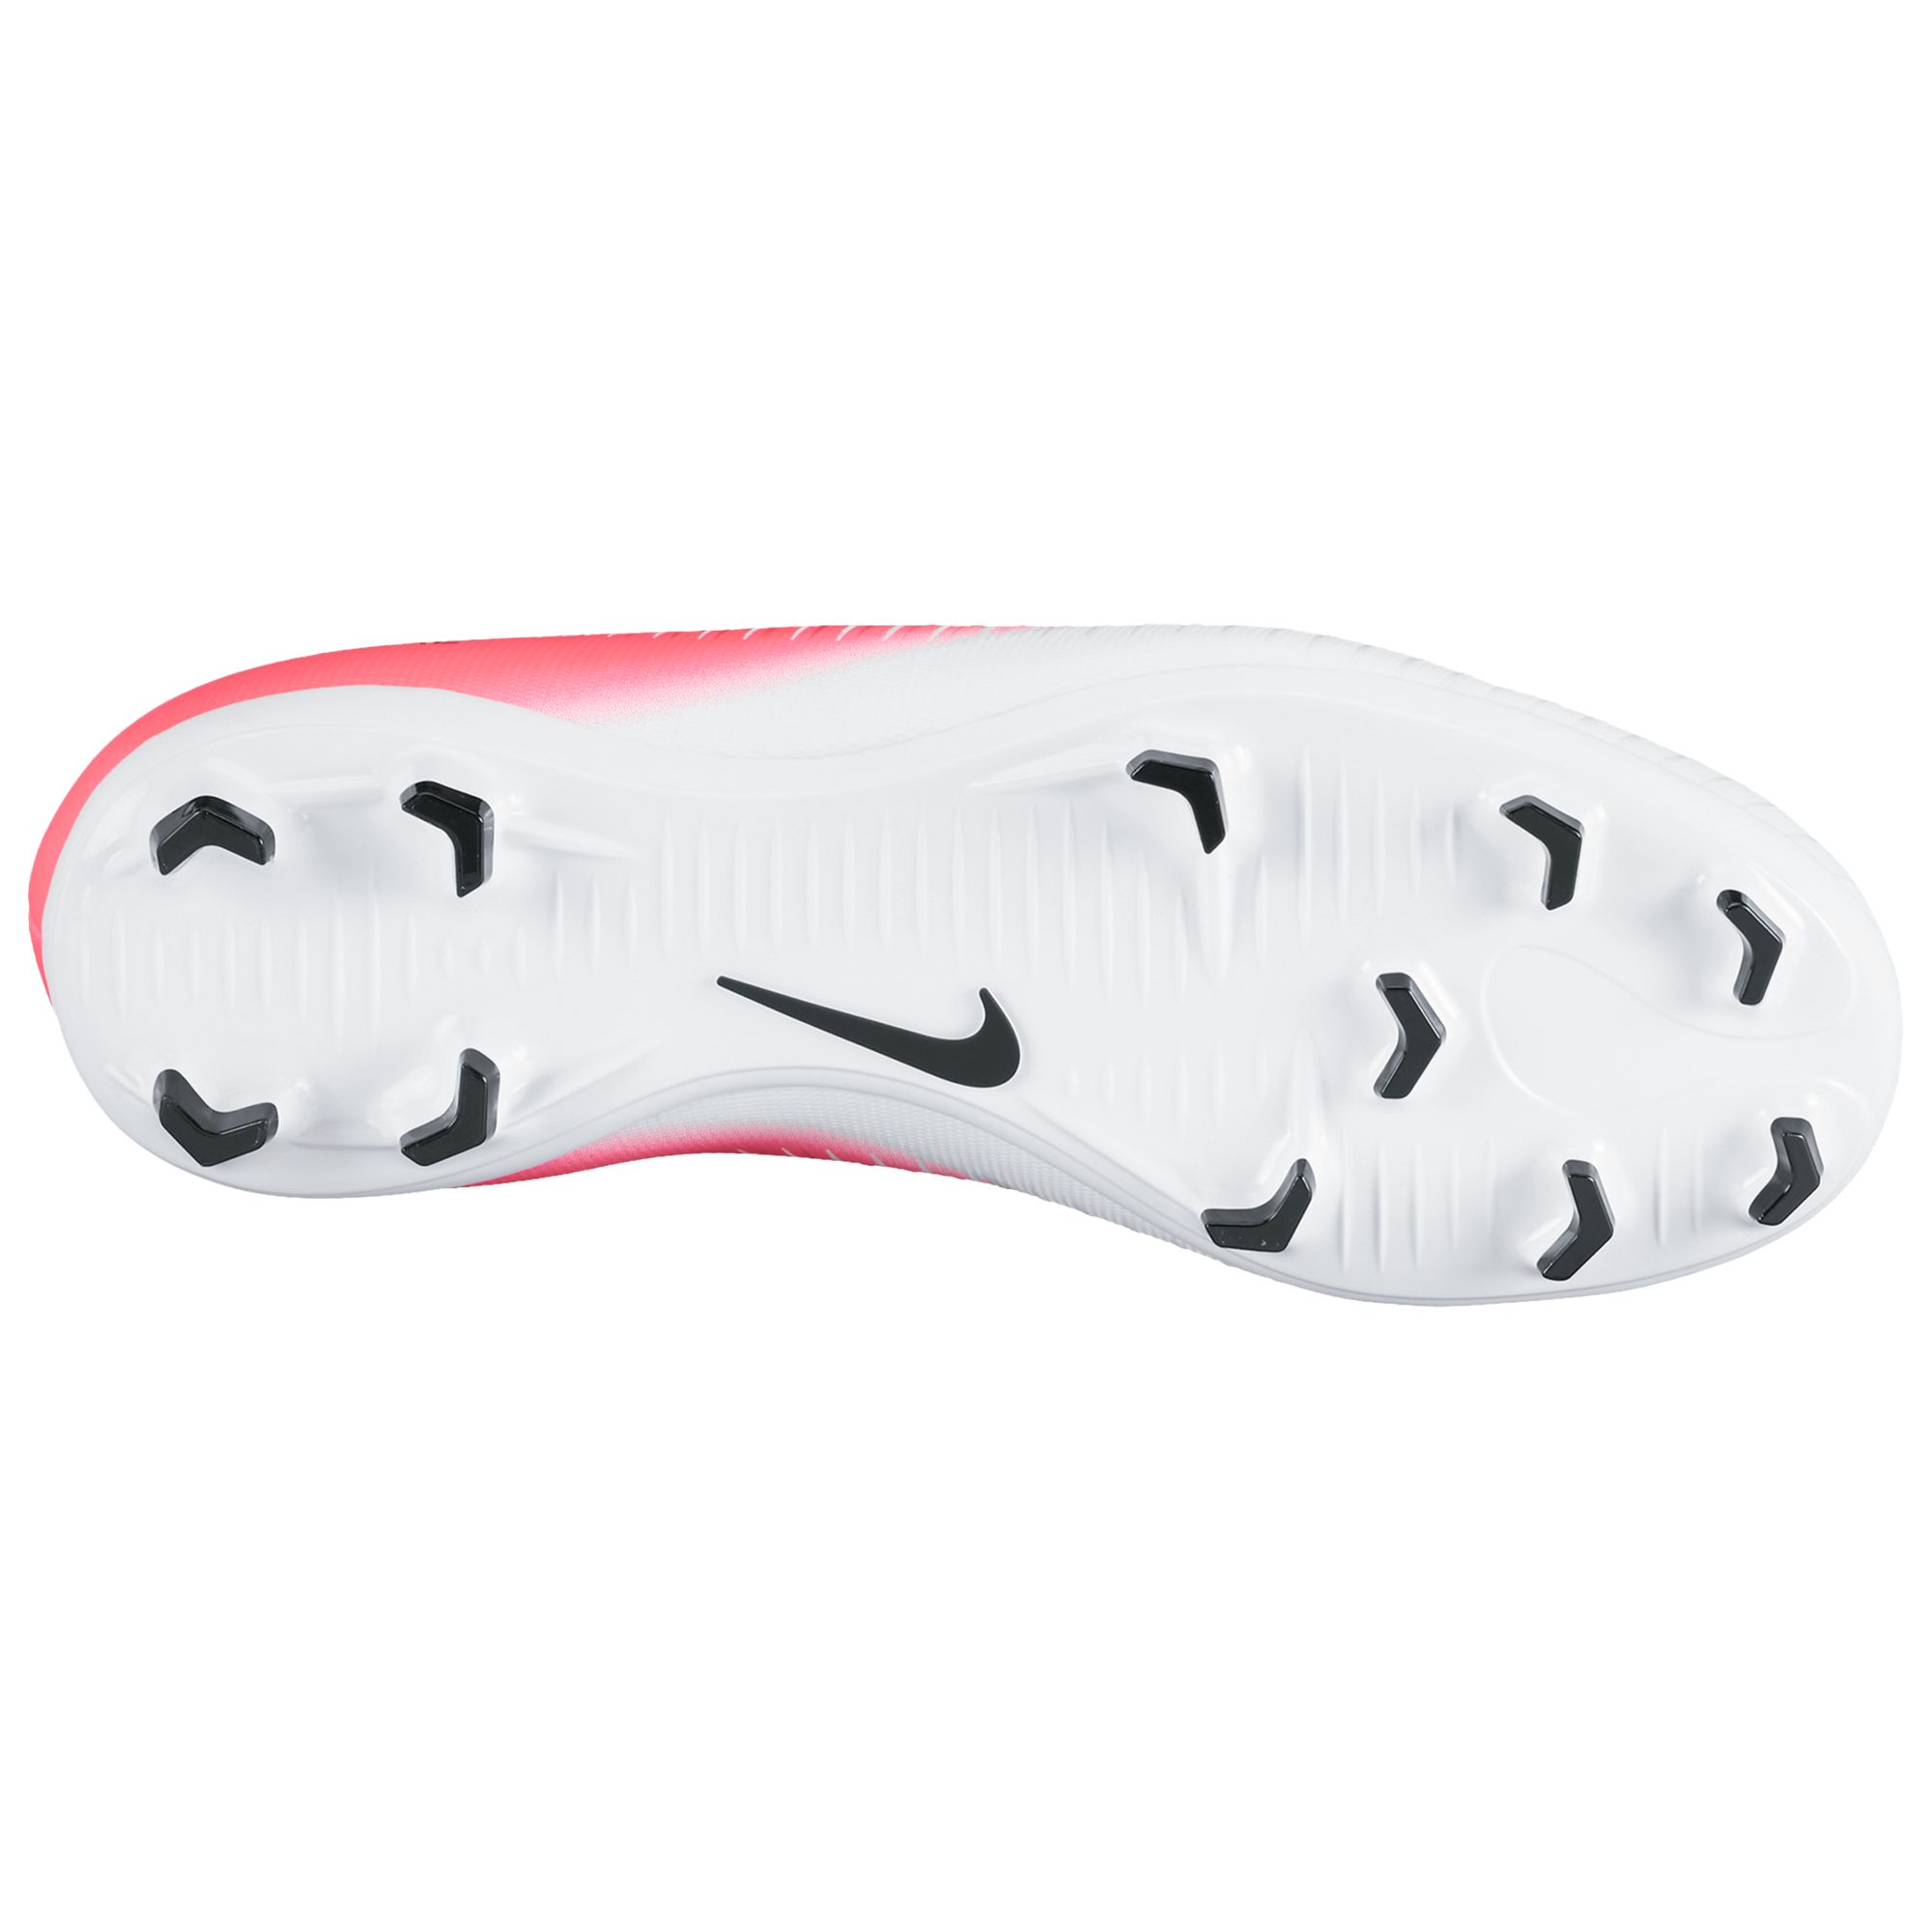 pink nike football boots